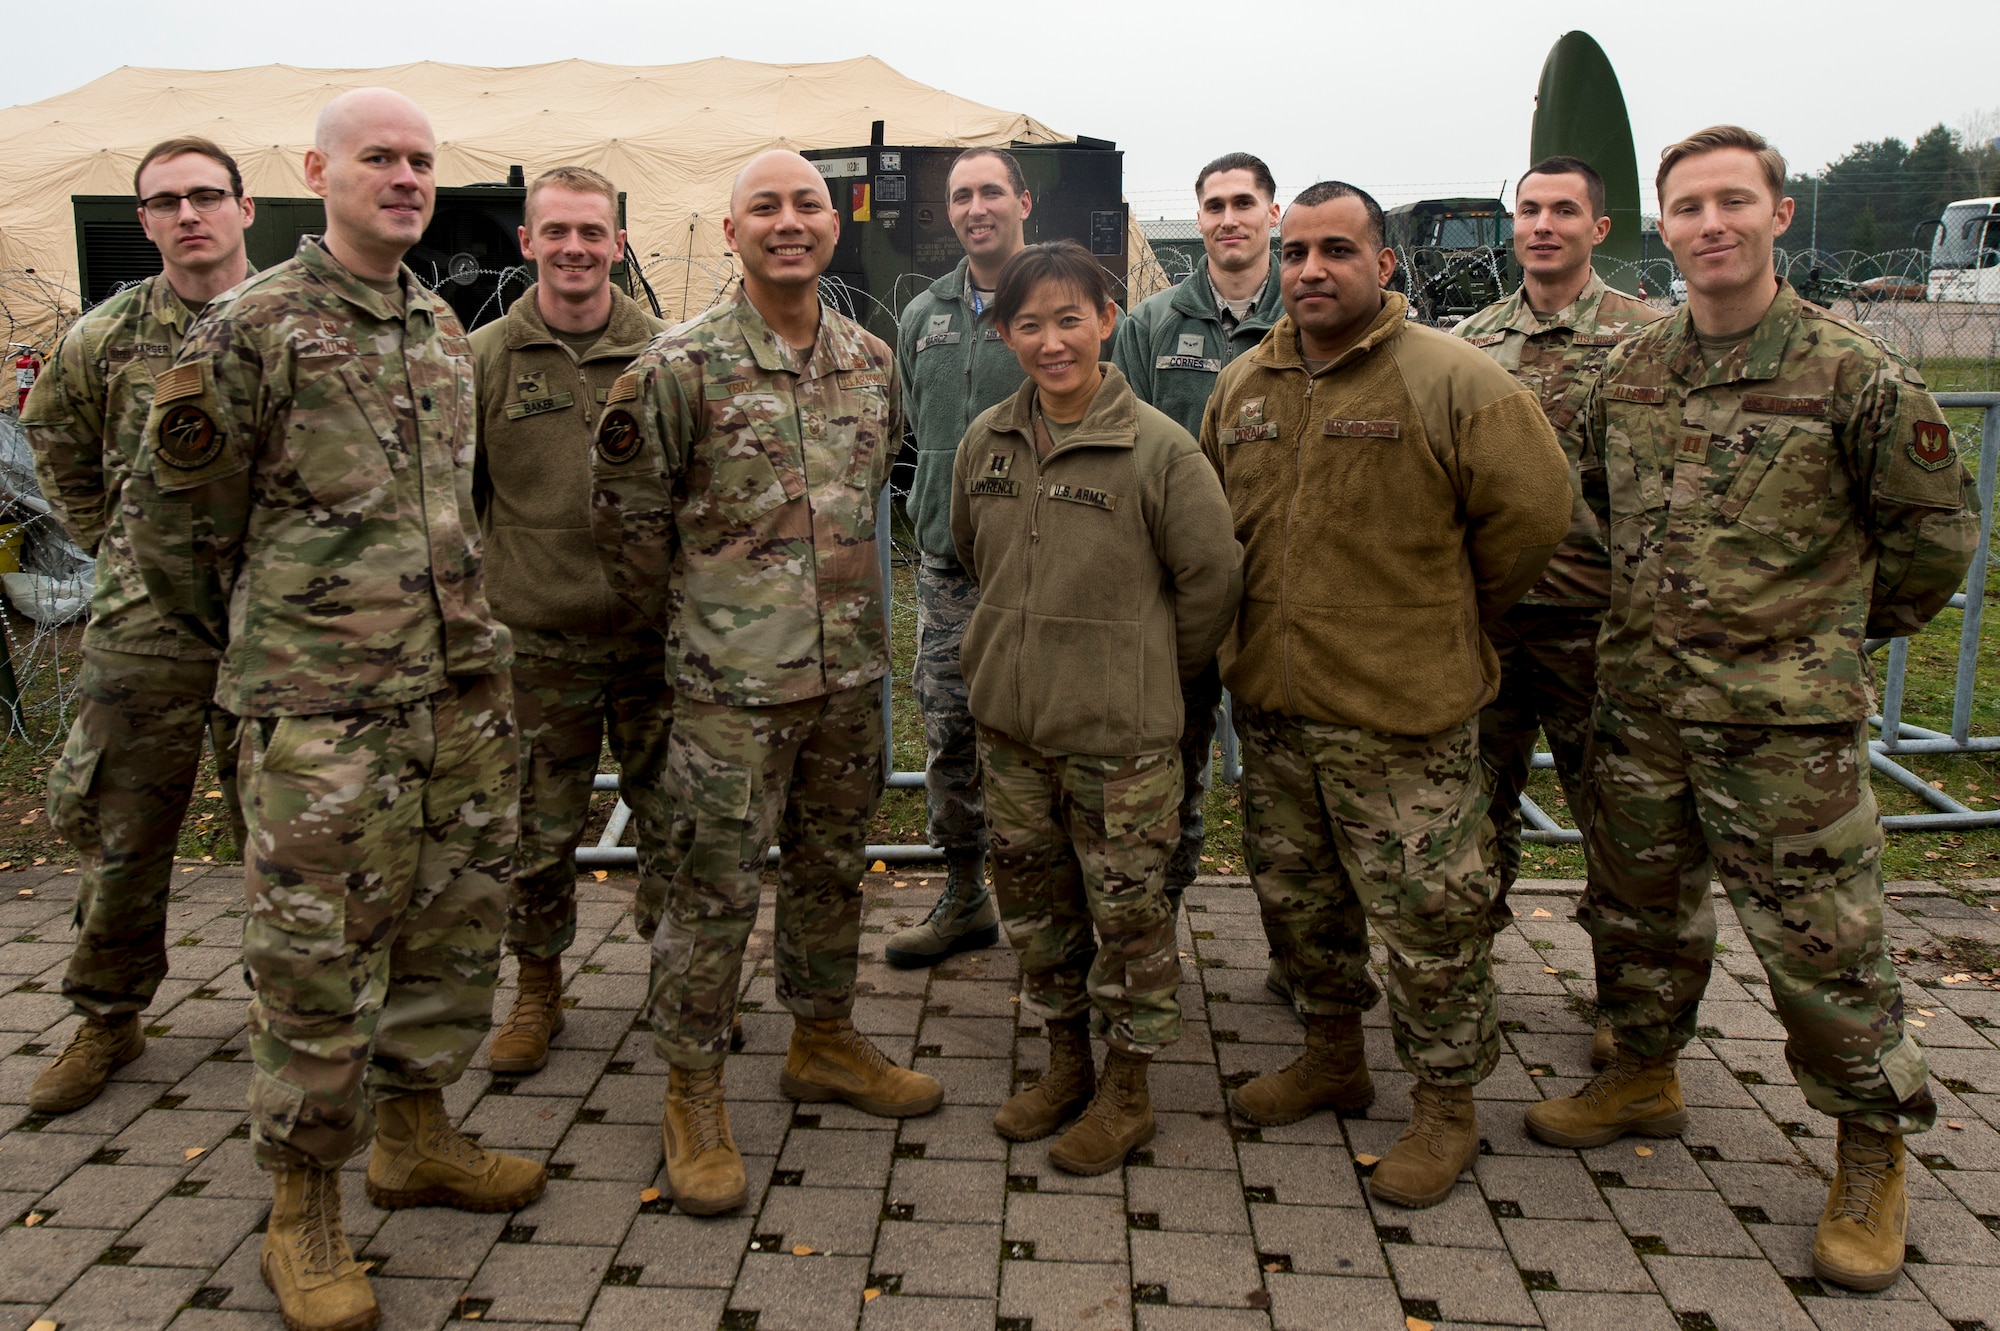 U.S. Airmen assigned to the 1st Air and Space Communications Operations Squadron and U.S. Soldiers assigned to the 66th Military Intelligence Brigade (Theater) pose for a group photo during Exercise Wild Card Straight on Rhine Ordnance Barracks, Germany, Nov. 21, 2019. During Wild Card Straight, Airmen and Soldiers practiced their ability to establish communications equipment and Intelligence, Surveillance and Reconnaissance operations in preparation for Exercise Juniper Cobra 20. Juniper Cobra 20 is a coalition exercise in Israel, June 2020. (U.S. Air Force photo by Staff Sgt. Jonathan Bass)